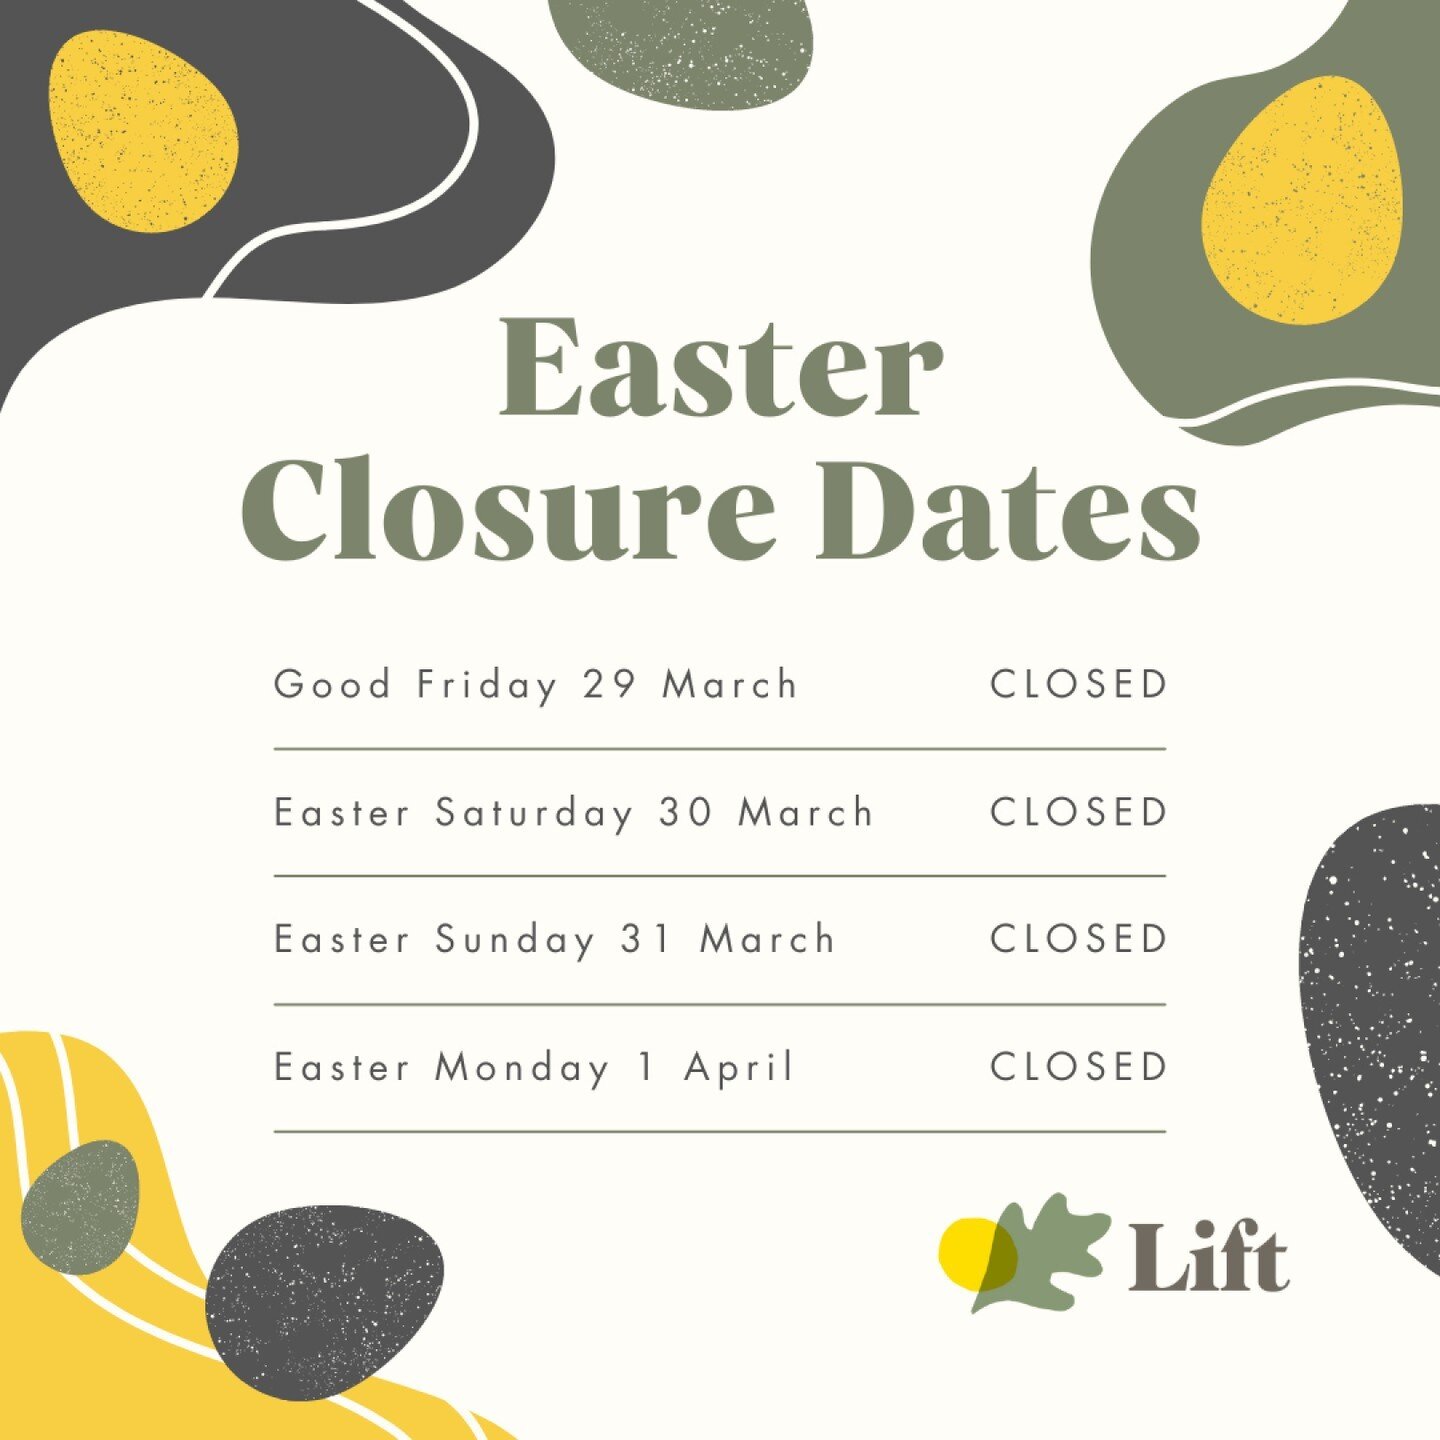 Easter is nearly here 🐰 

It's life as usual at Lift today before we are closed for the whole Easter long weekend.
Our regular hours will resume on Tuesday, 2nd April.

From the entire team at Lift Cancer Care Services, we wish you a happy and safe 